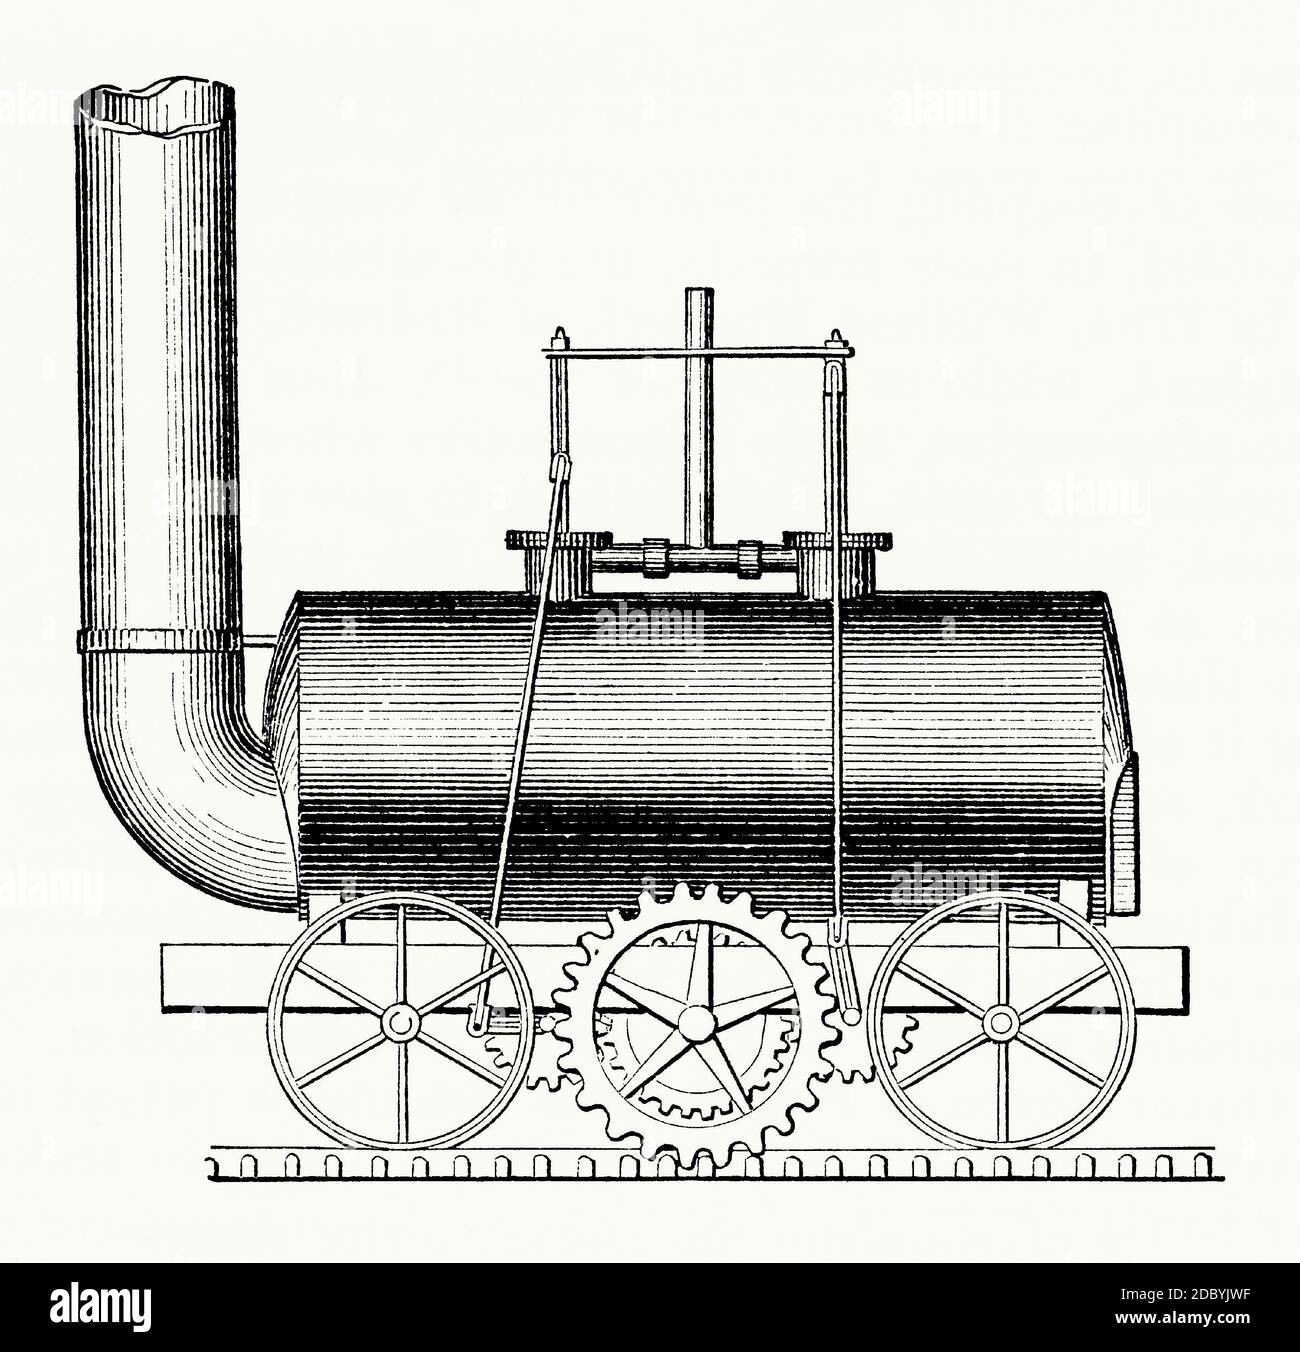 An old engraving of John Blenkinsop’s locomotive of 1811. John Blenkinsop (1783–1831) was an English mining engineer and an inventor of steam locomotives, who designed the first practical railway locomotive. In the early nineteenth century, attempts were being made to employ steam power for haulage. In 1811 Blenkinsop patented a rack and pinion system at the side of the track for a locomotive. His engine, weighing five tons, regularly hauled a payload of ninety tons of coal over three miles from the Middleton Colliery, Middletown to Leeds, Yorkshire, England, UK. Stock Photo